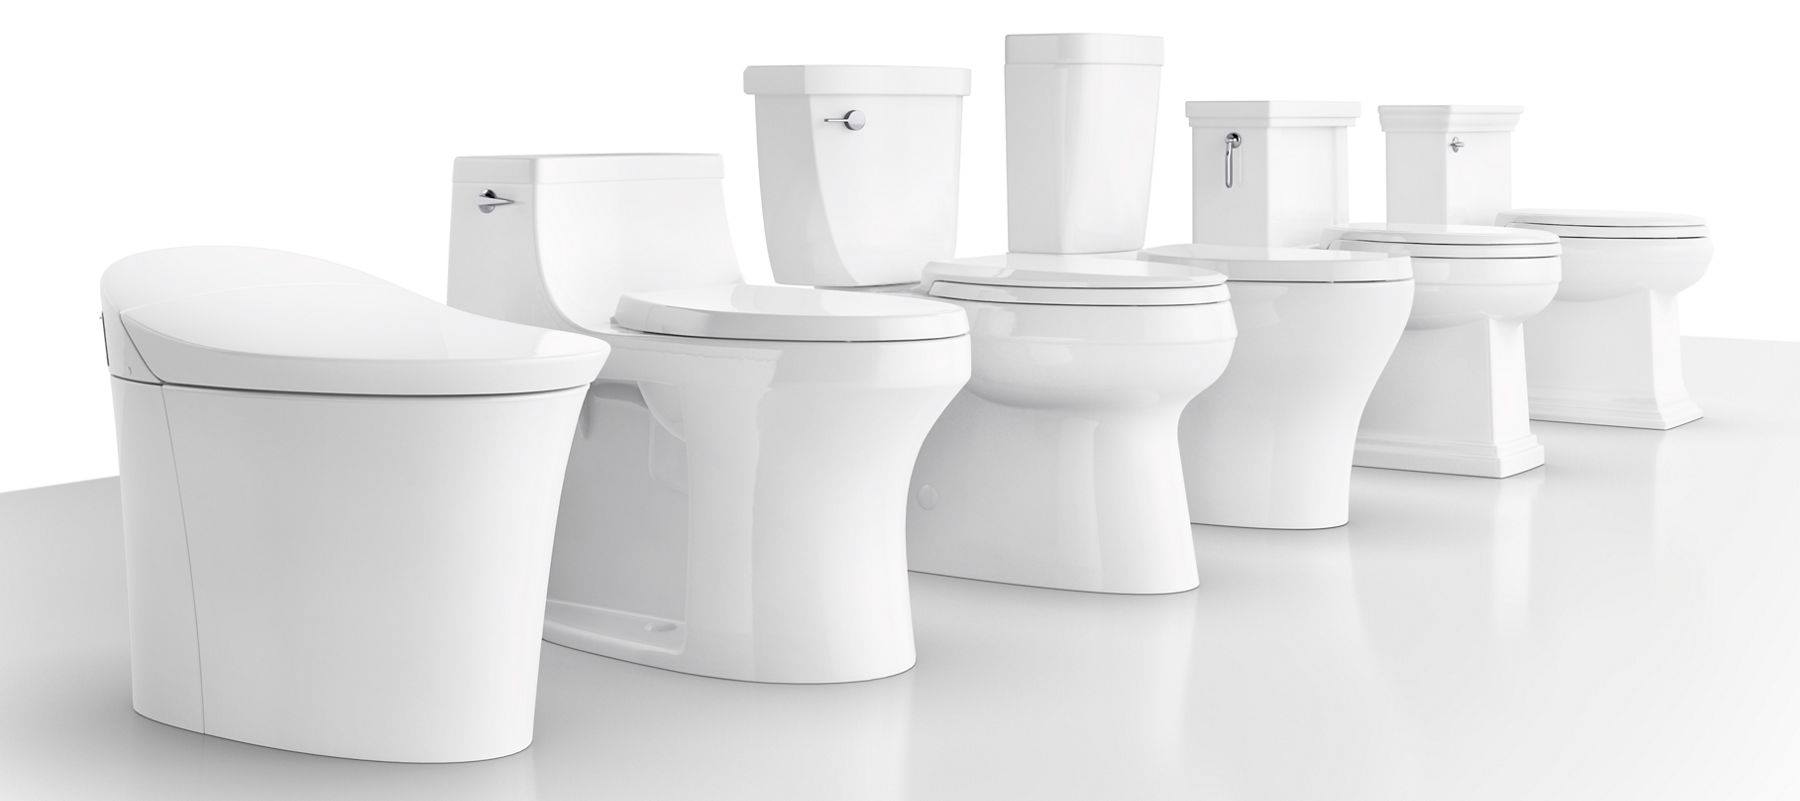 6 toilets line up, all different styles/options